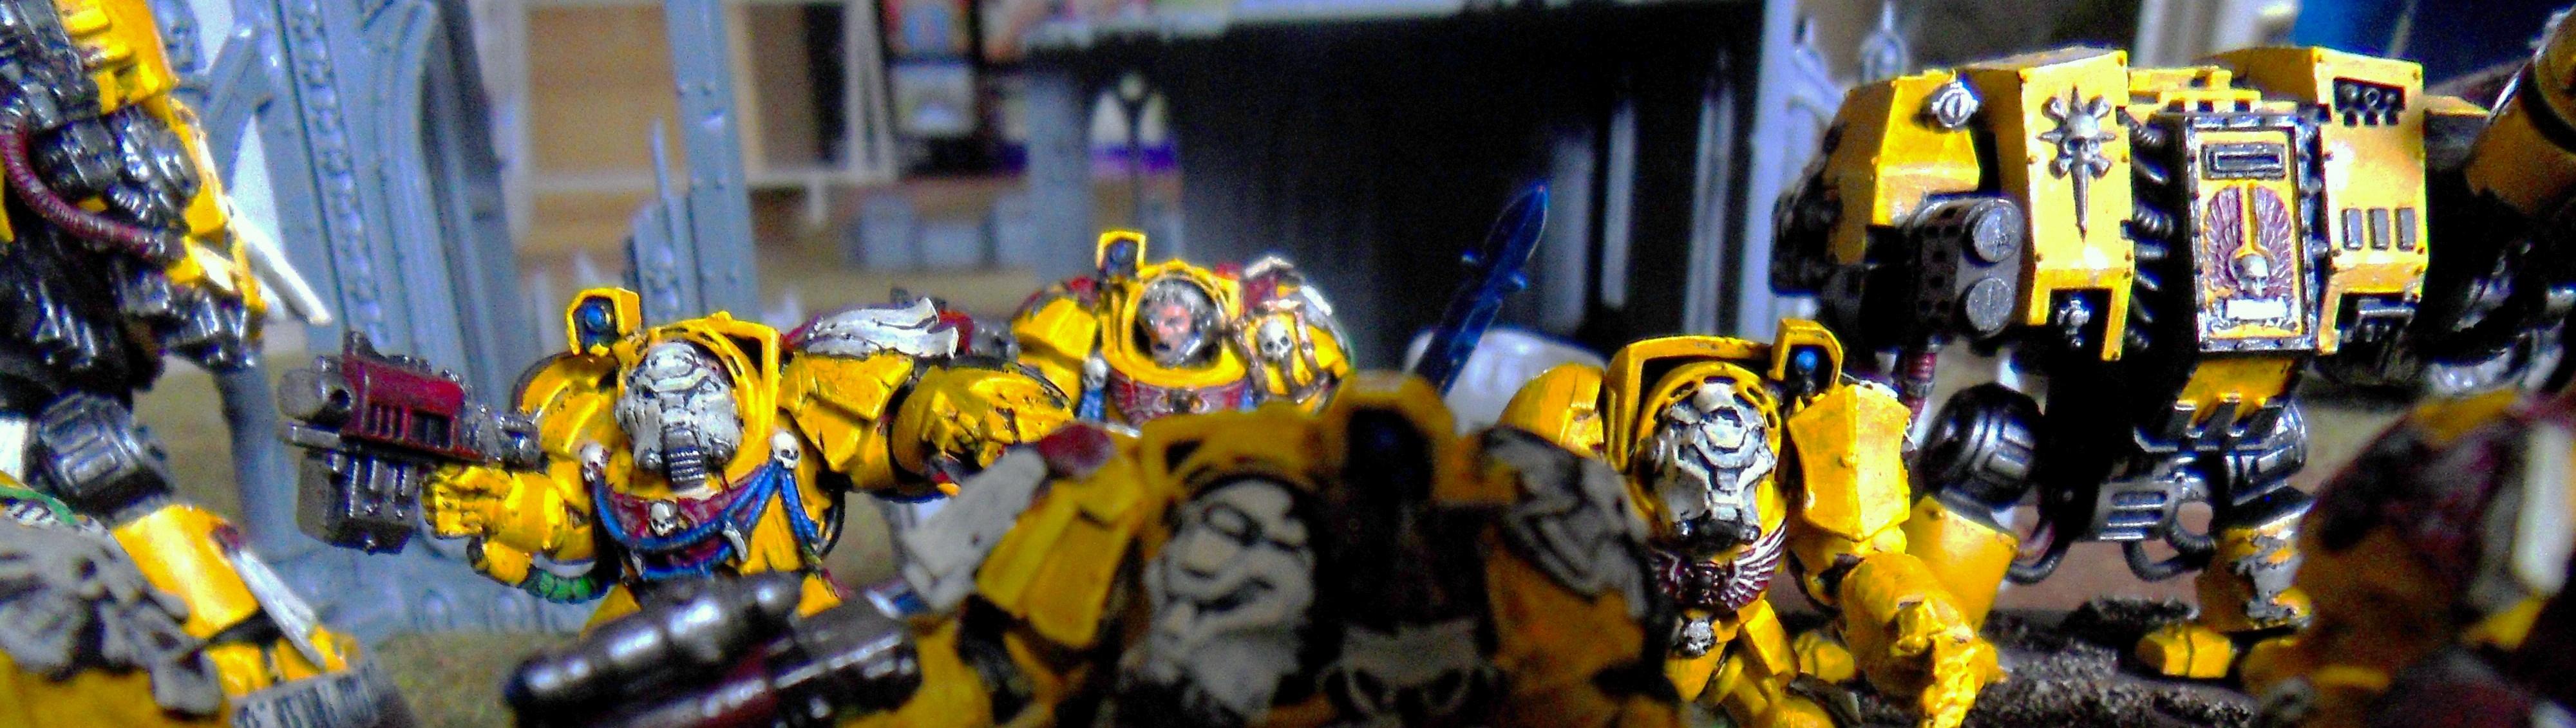 Artwork, Imperial Fists, Space Marines